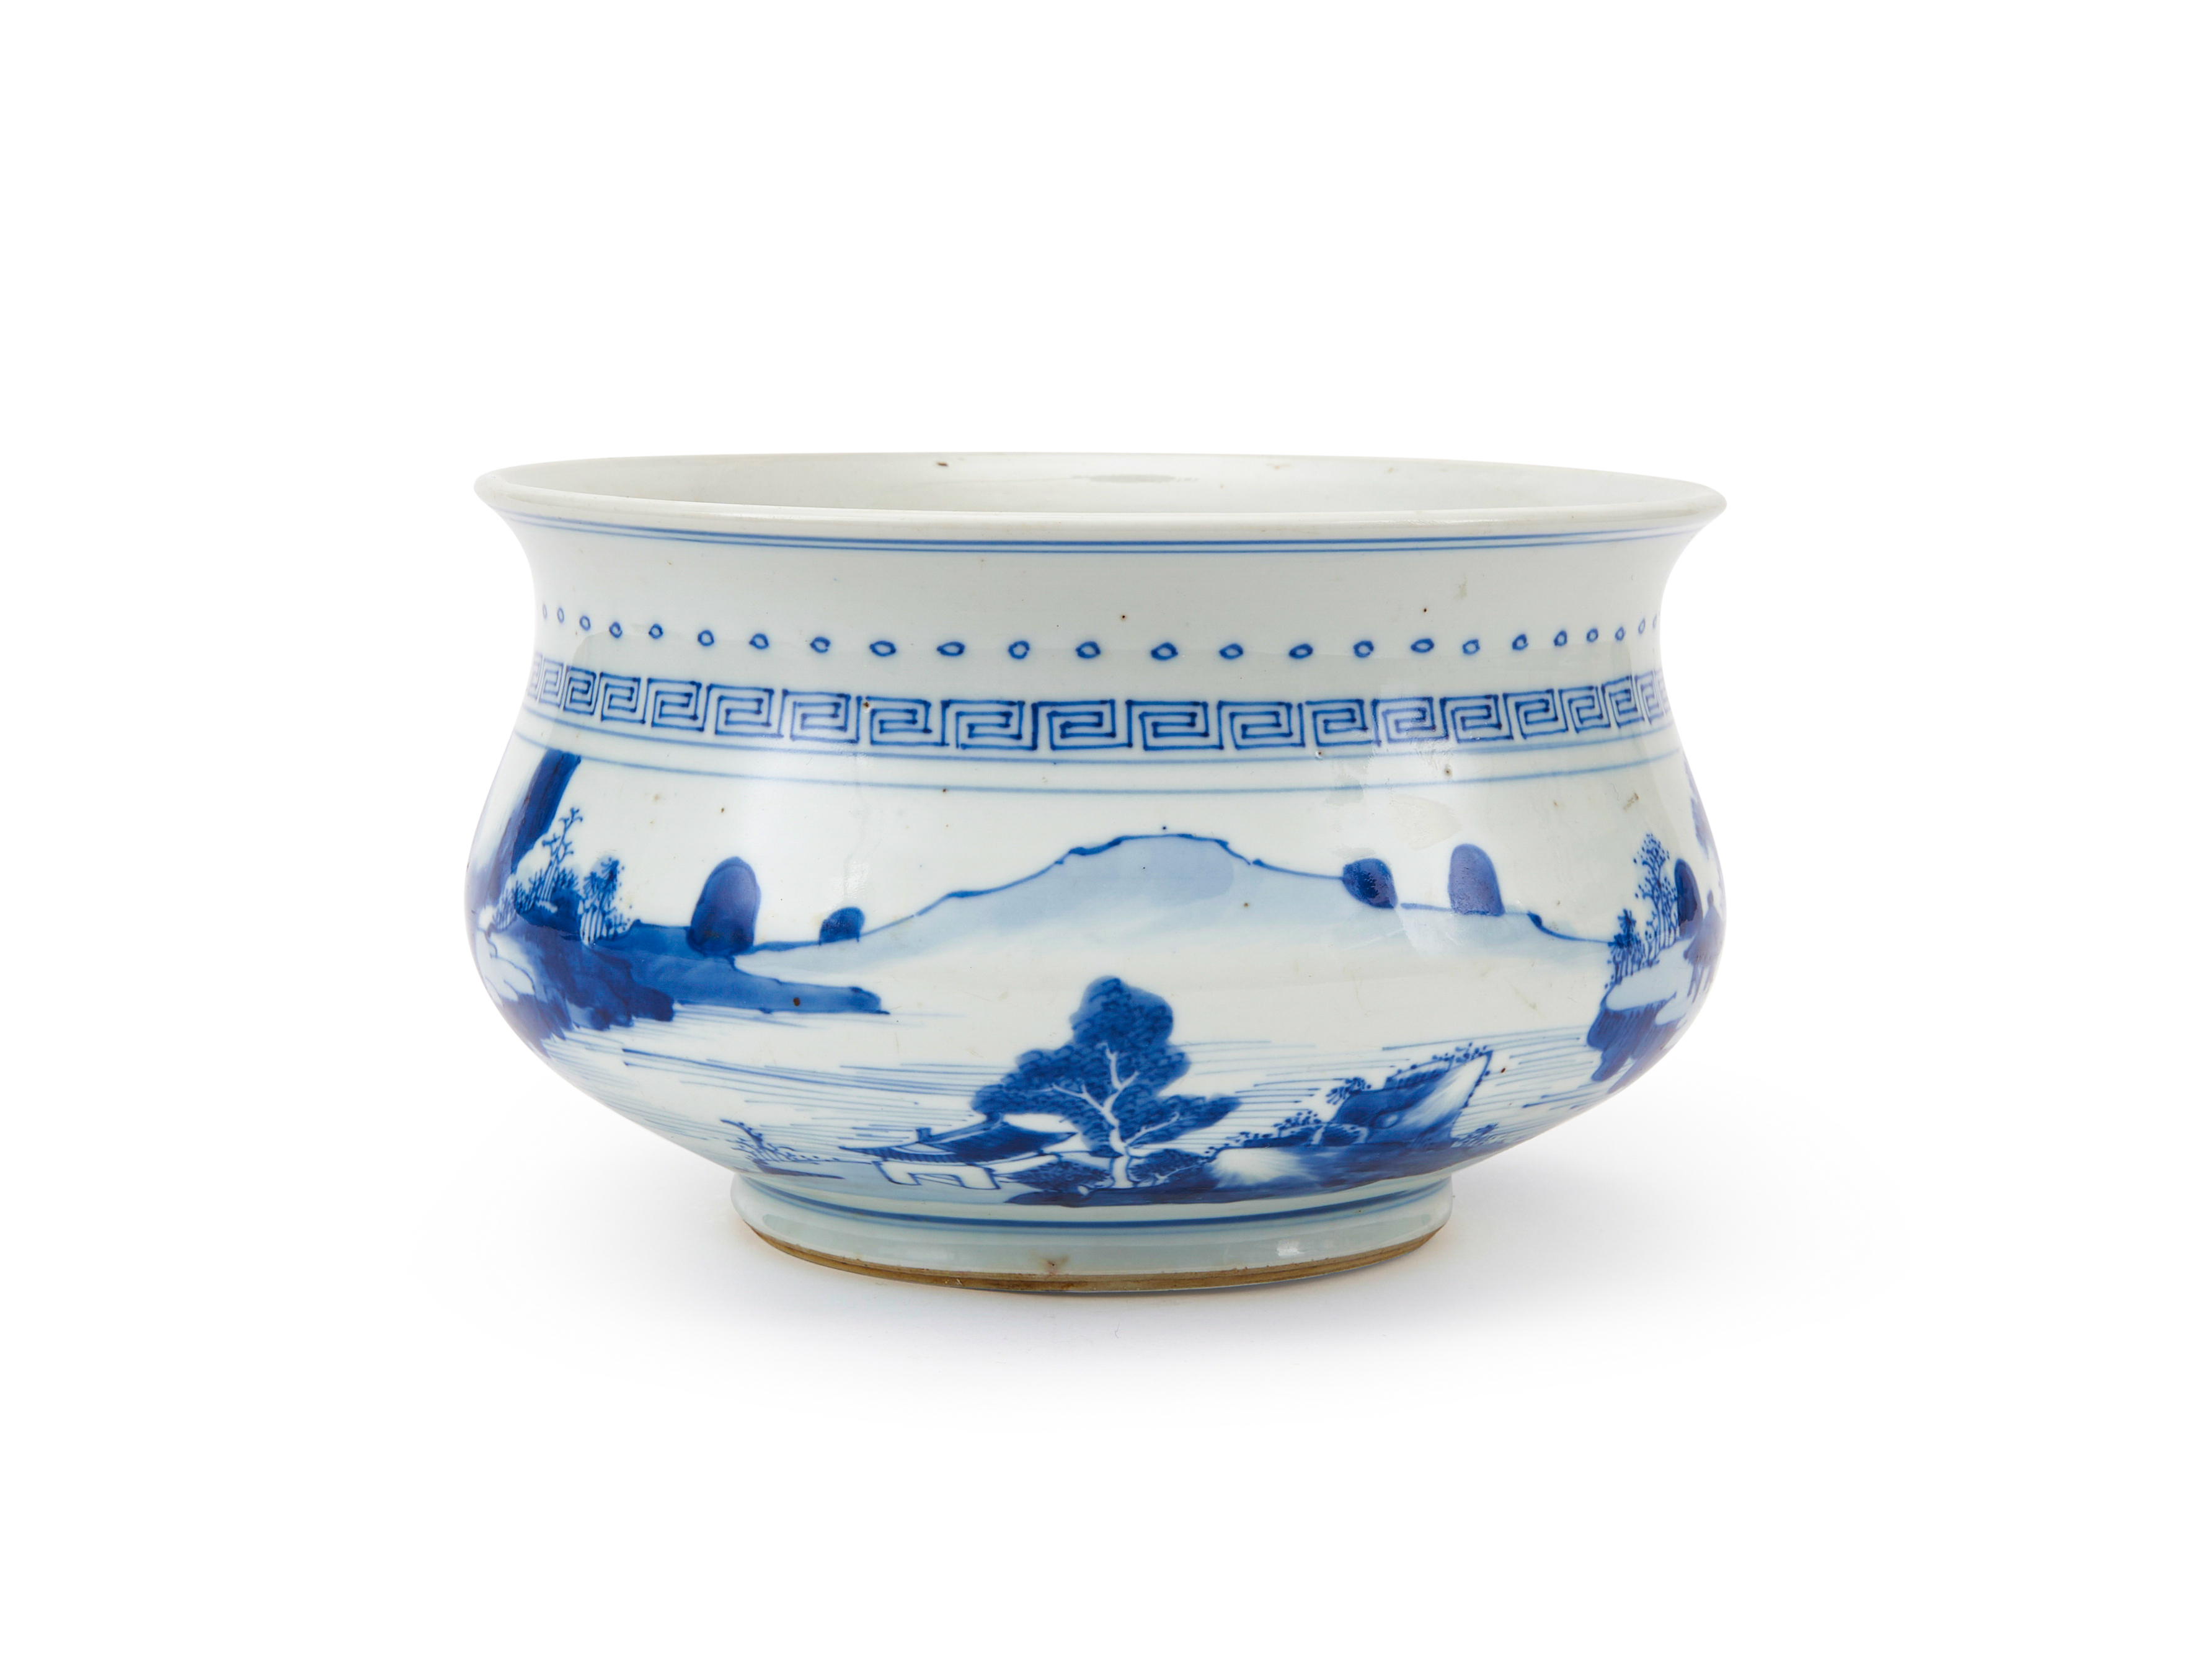 A CHINESE BLUE & WHITE CENSER, KANGXI PERIOD (1662-1772) - Image 4 of 6